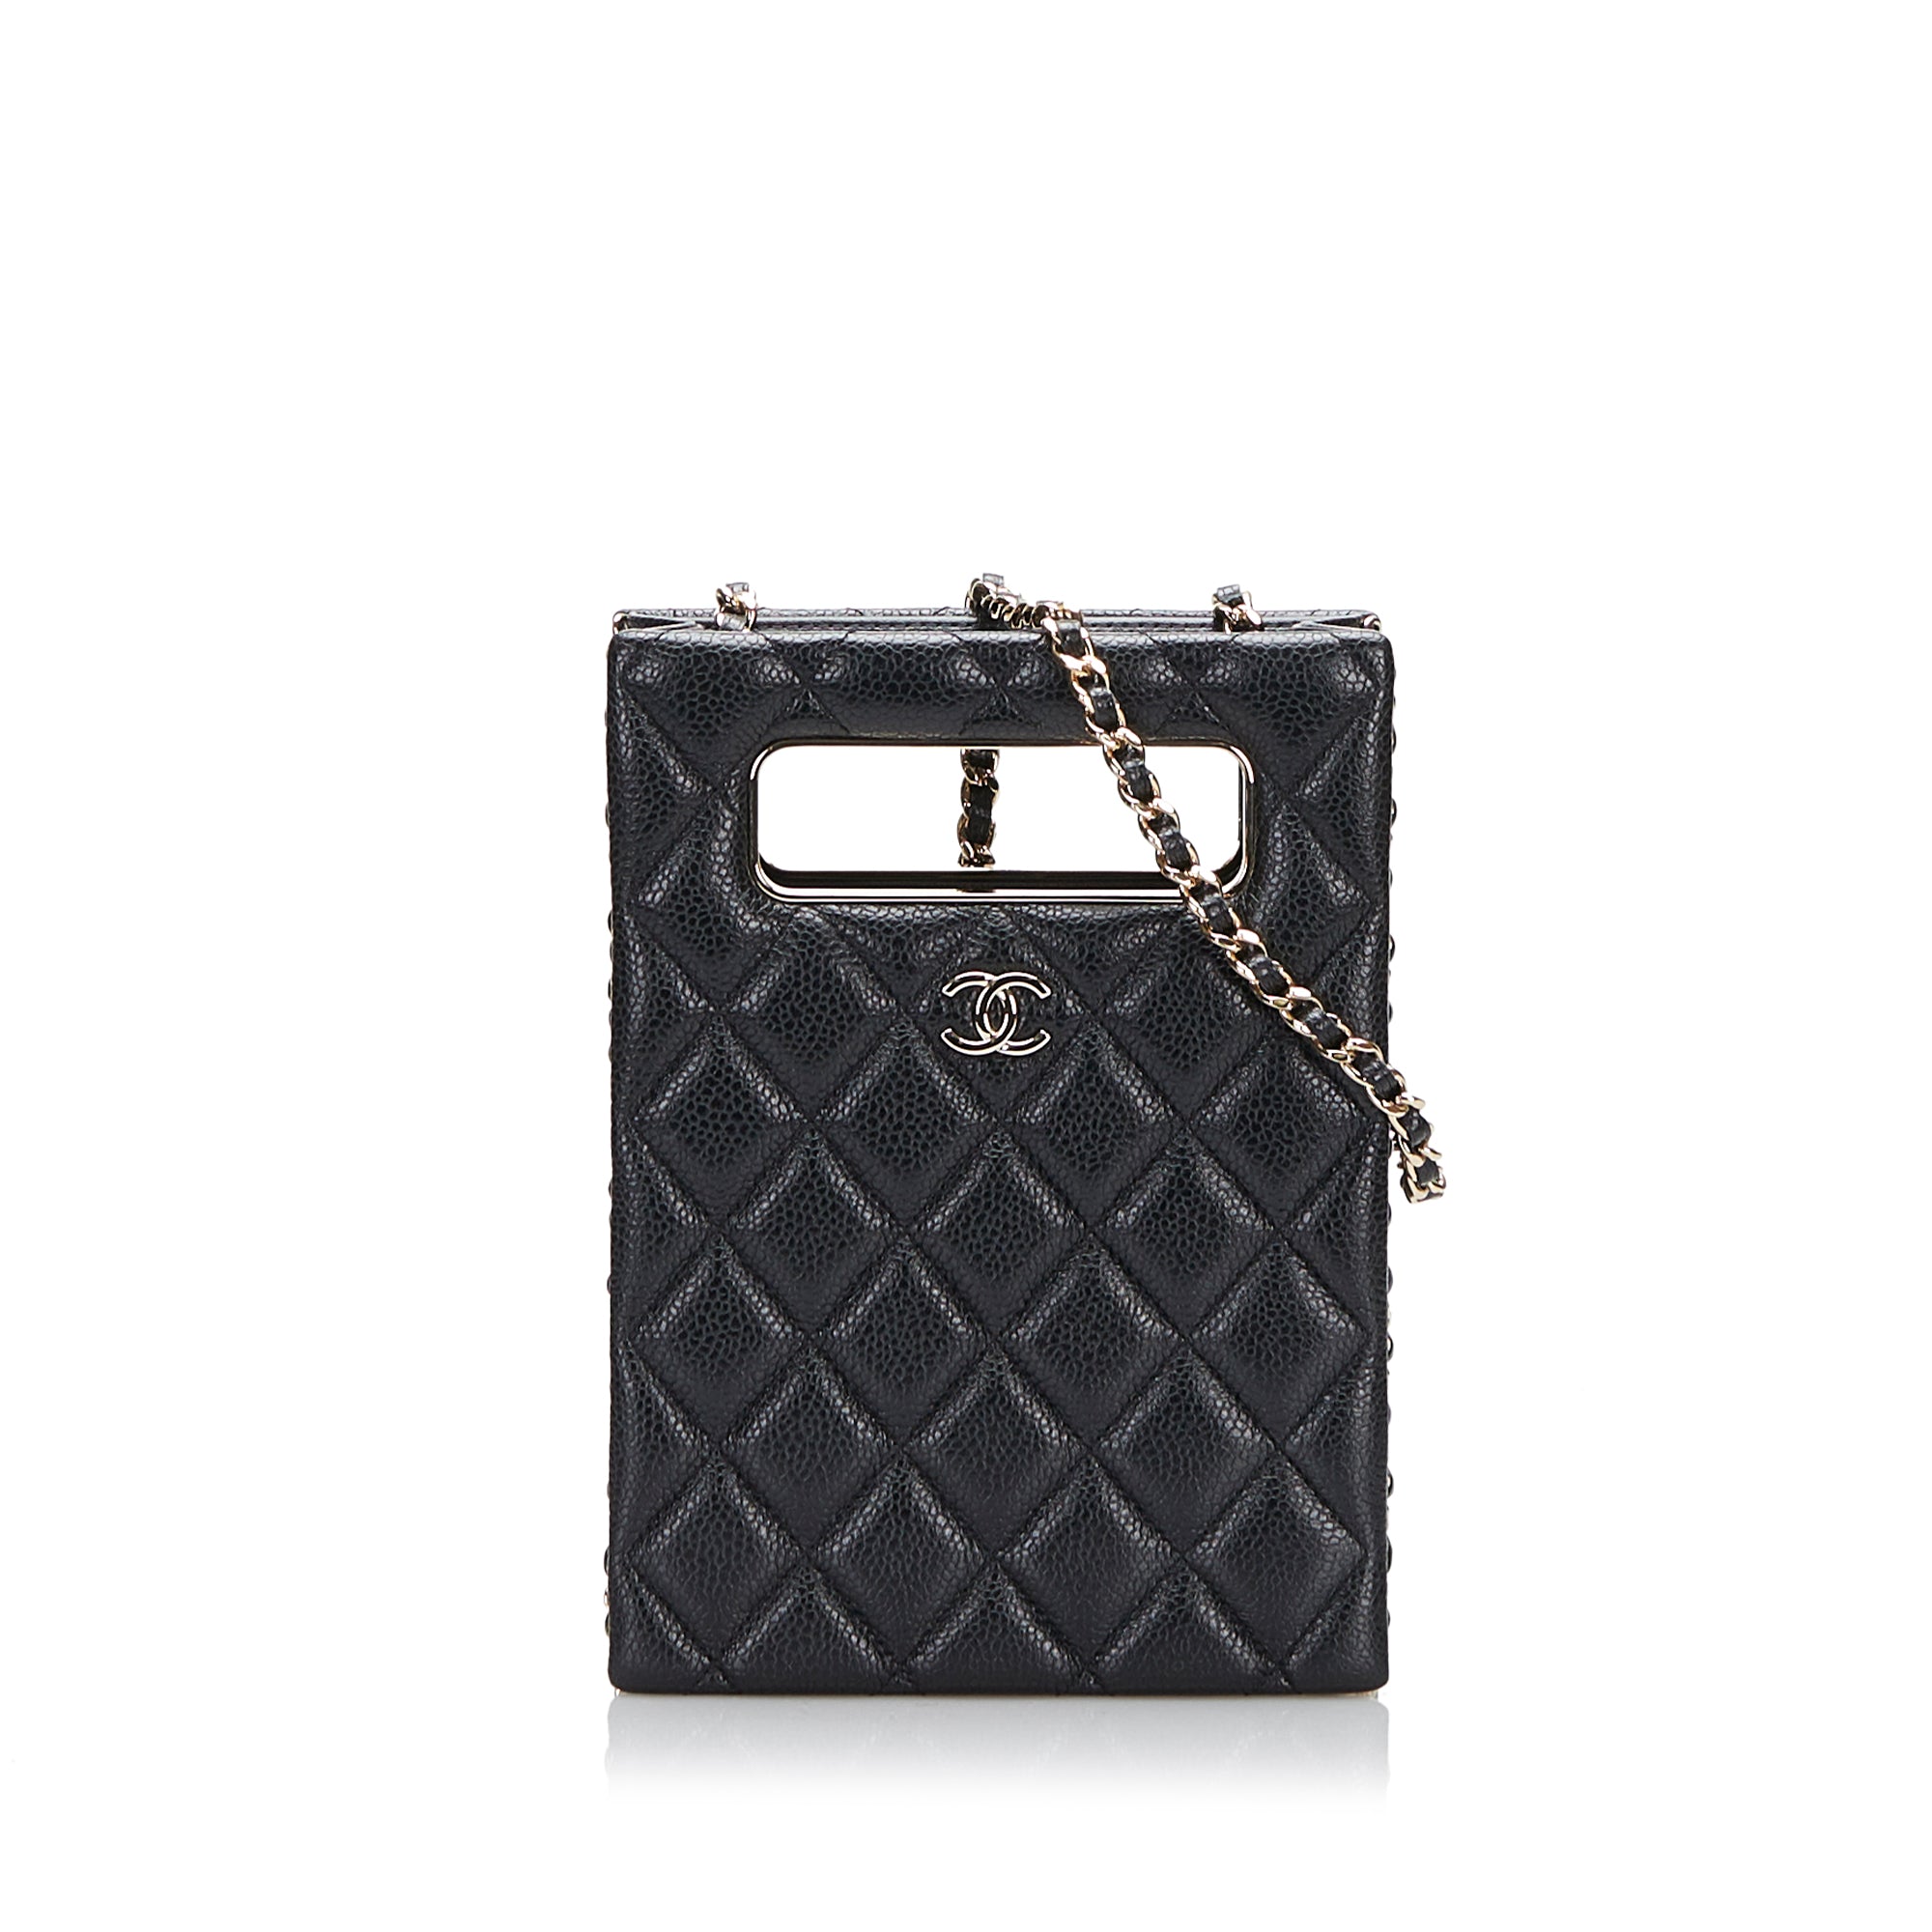 Chanel Quilted Evening Bag